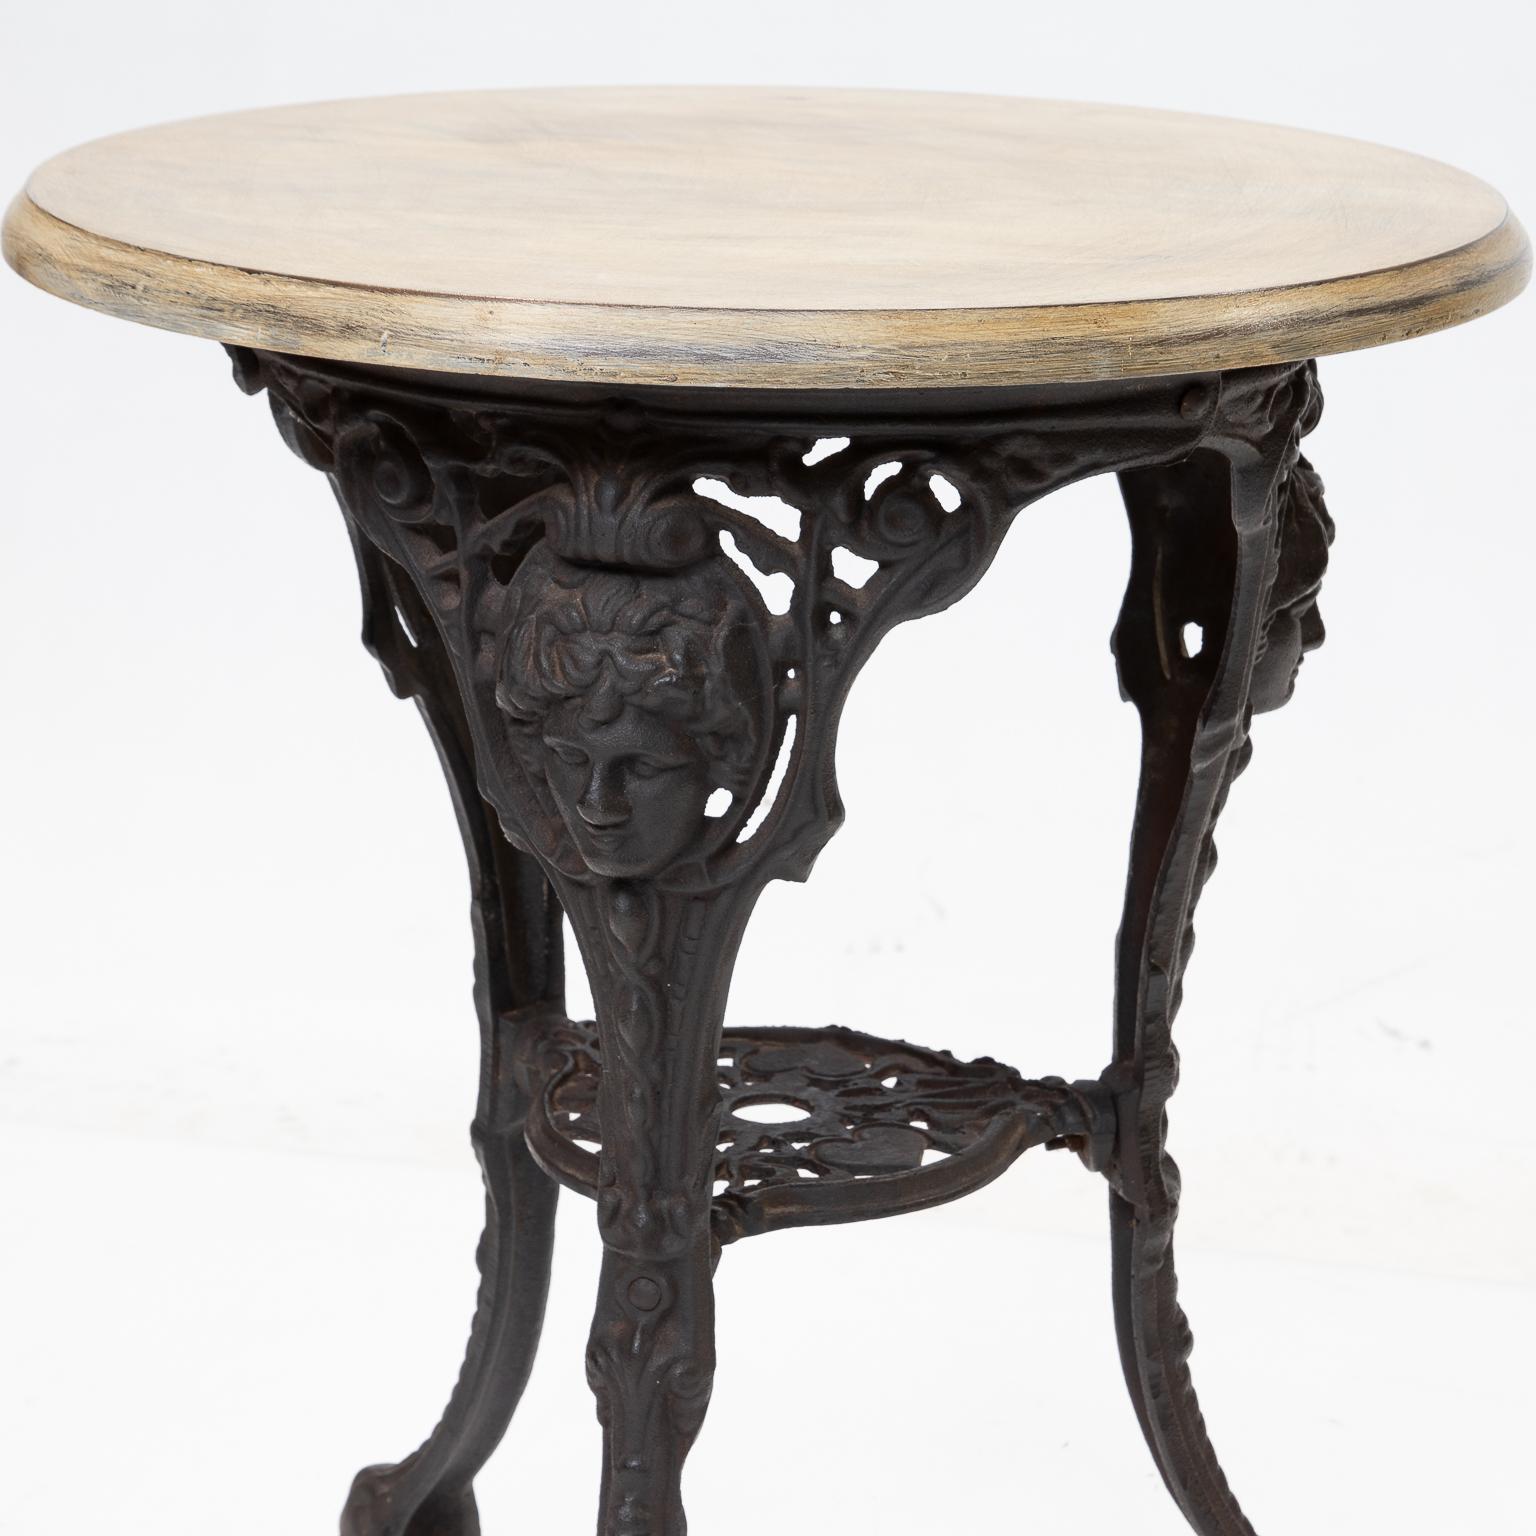 English pub or bistro table with a black iron base and a painted top.